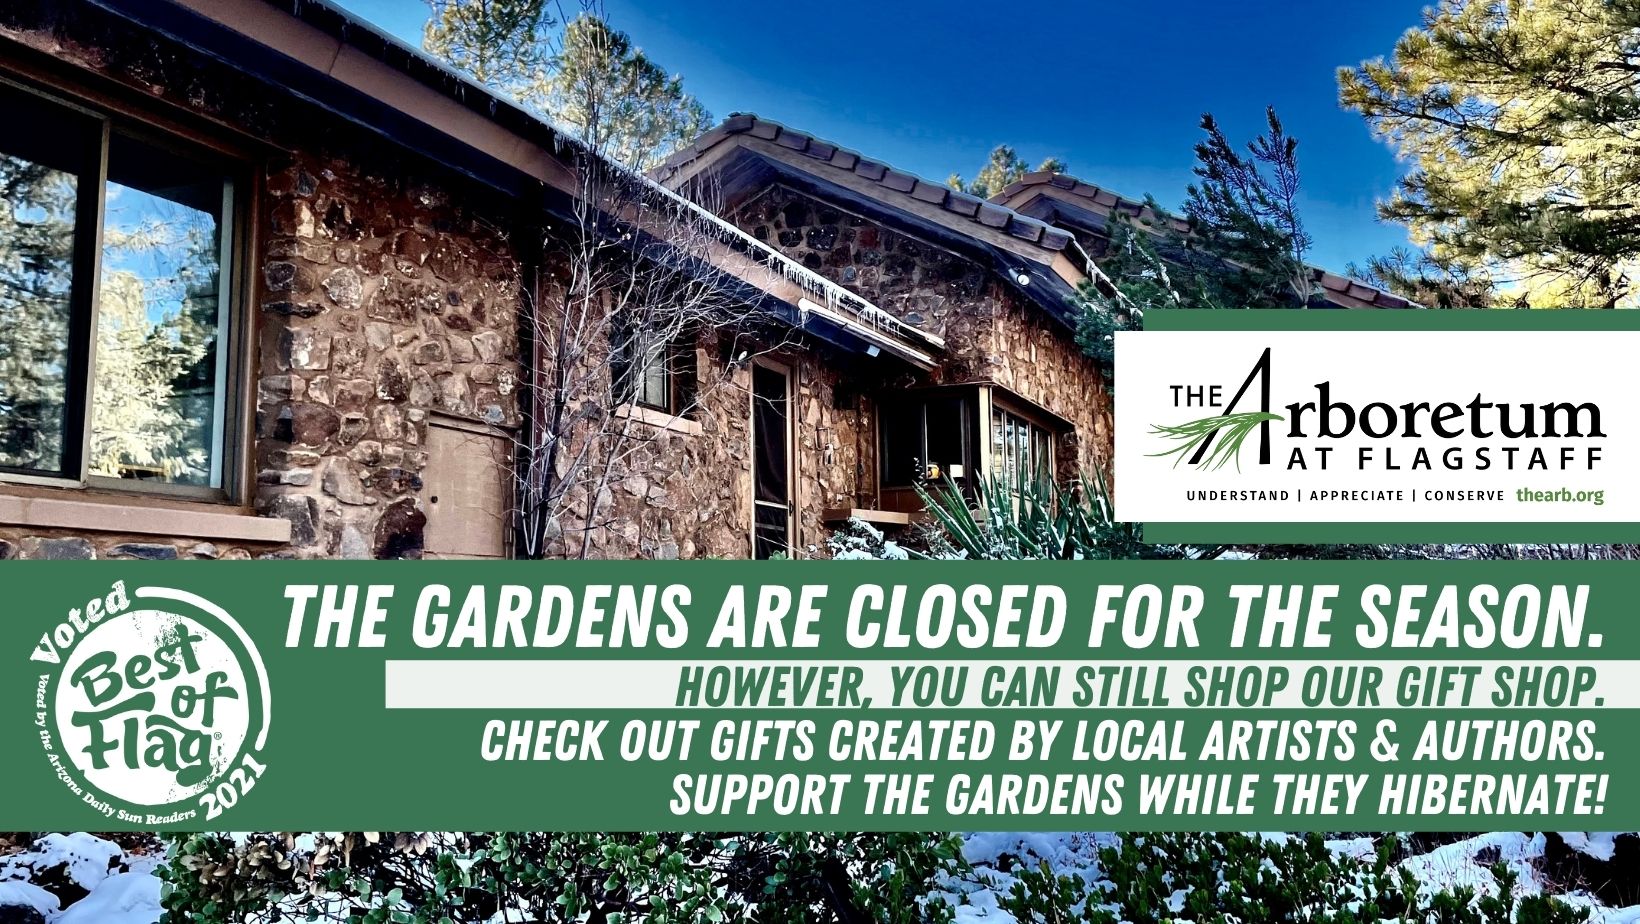 The Gardens are closed for the season, but click below to shop gifts created by local artists and authors. Support the gardens while they hibernate.